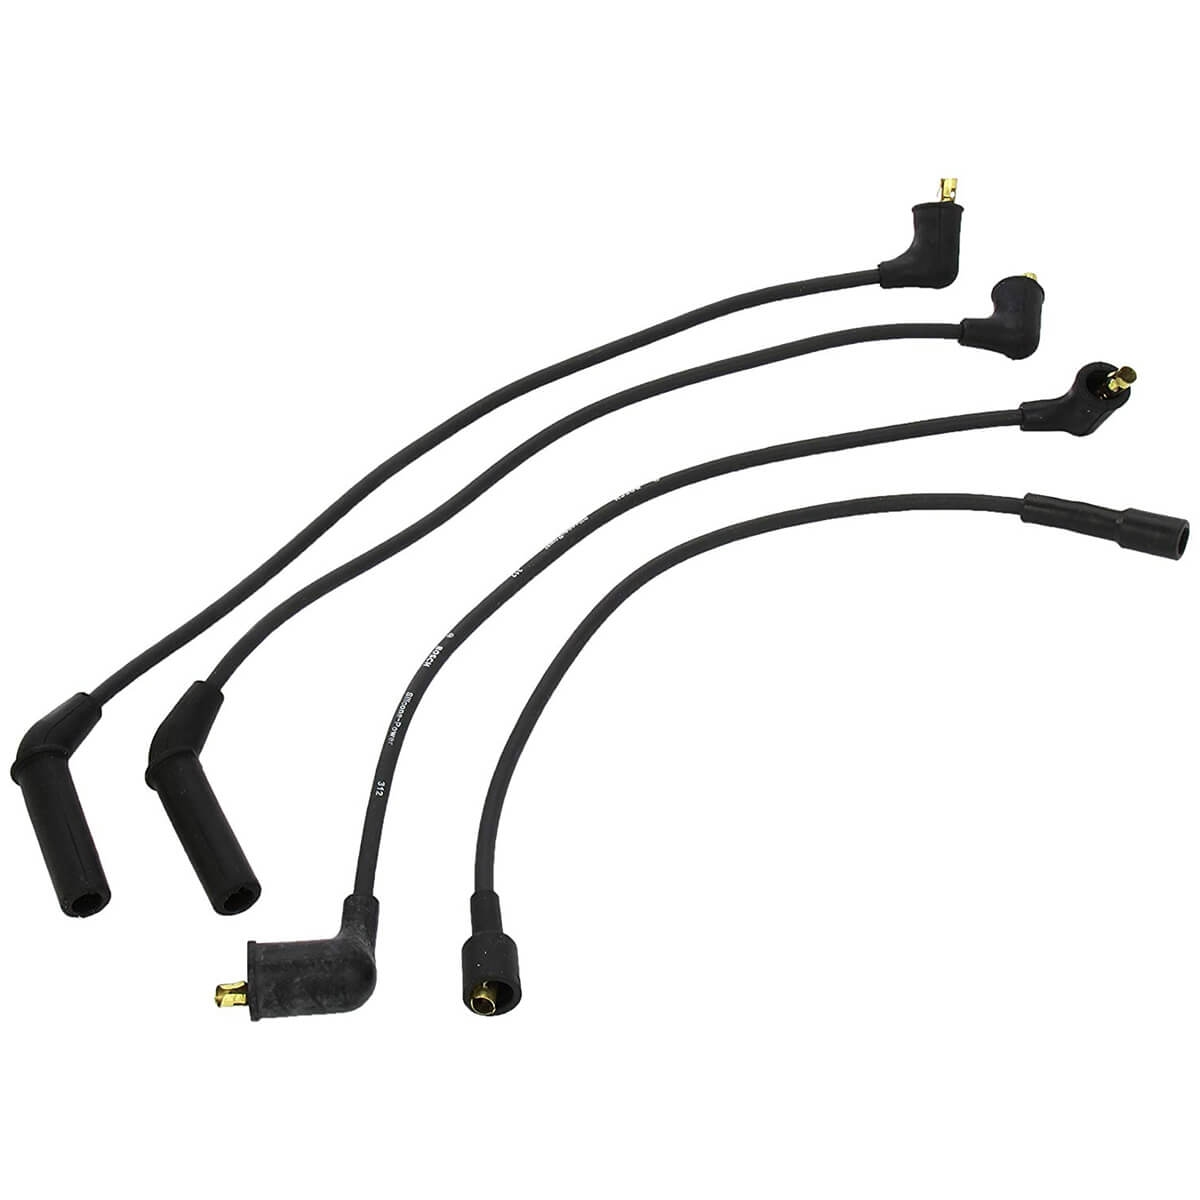 MERCEDES-BENZ 124 Ignition Cable Kit